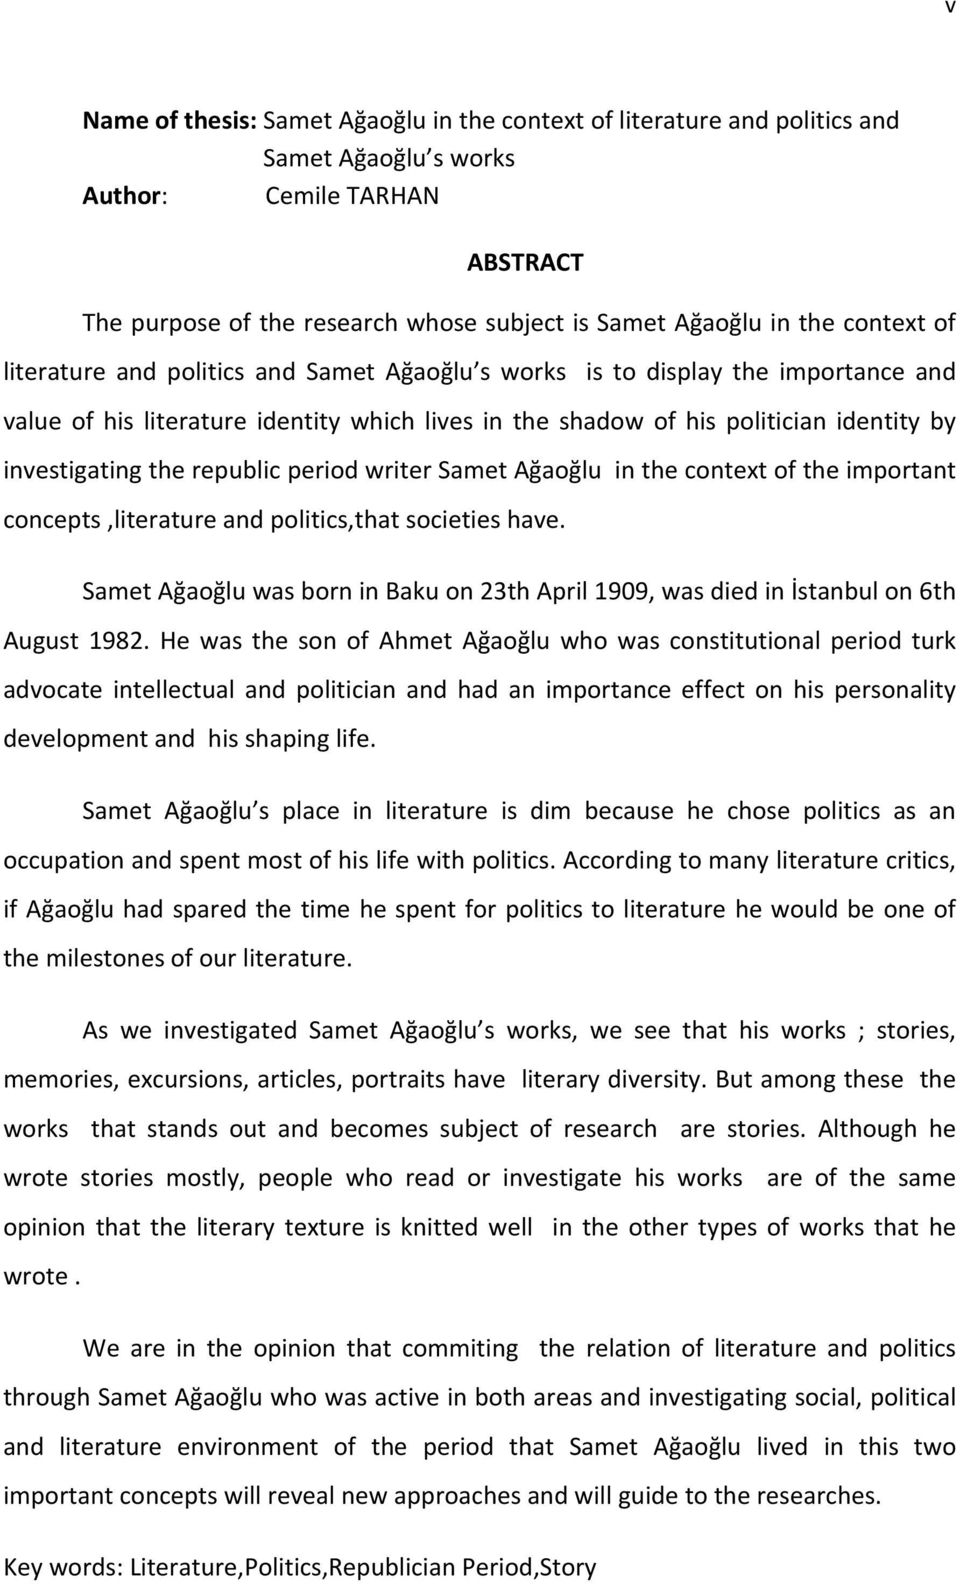 the republic period writer Samet Ağaoğlu in the context of the important concepts,literature and politics,that societies have.